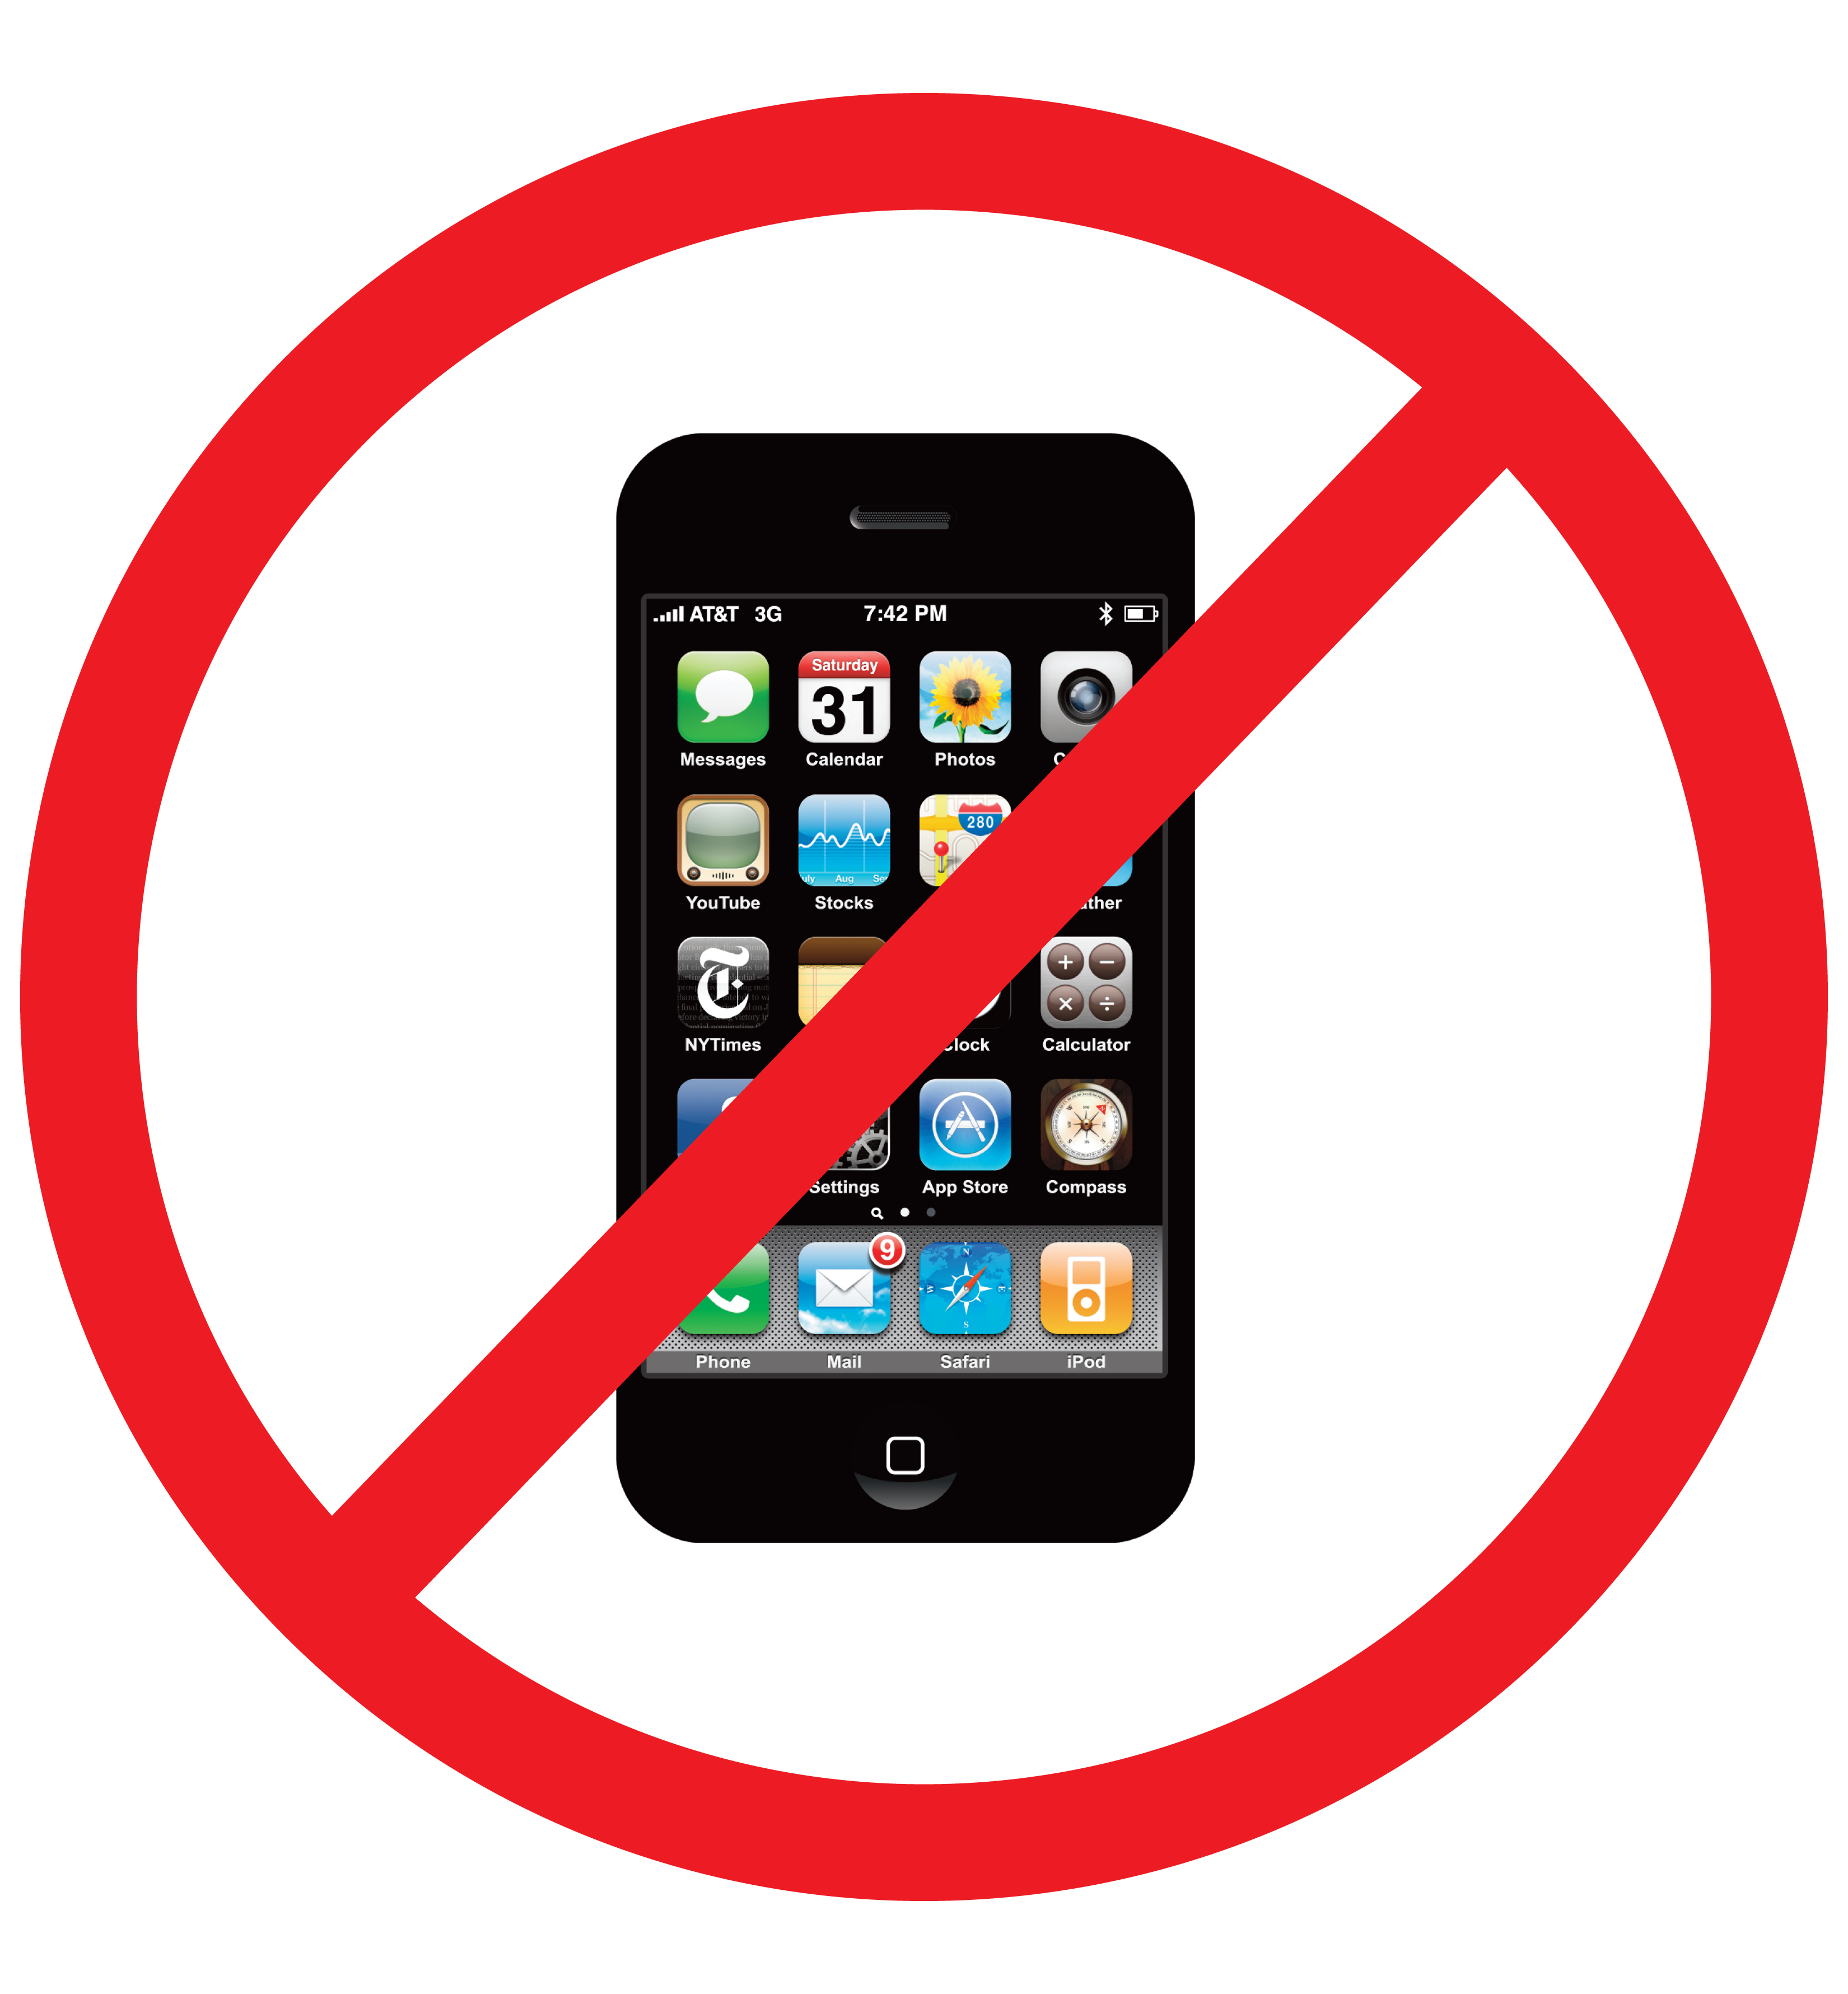 18 No Cell Phones Image Free Cliparts That You Can Download To You